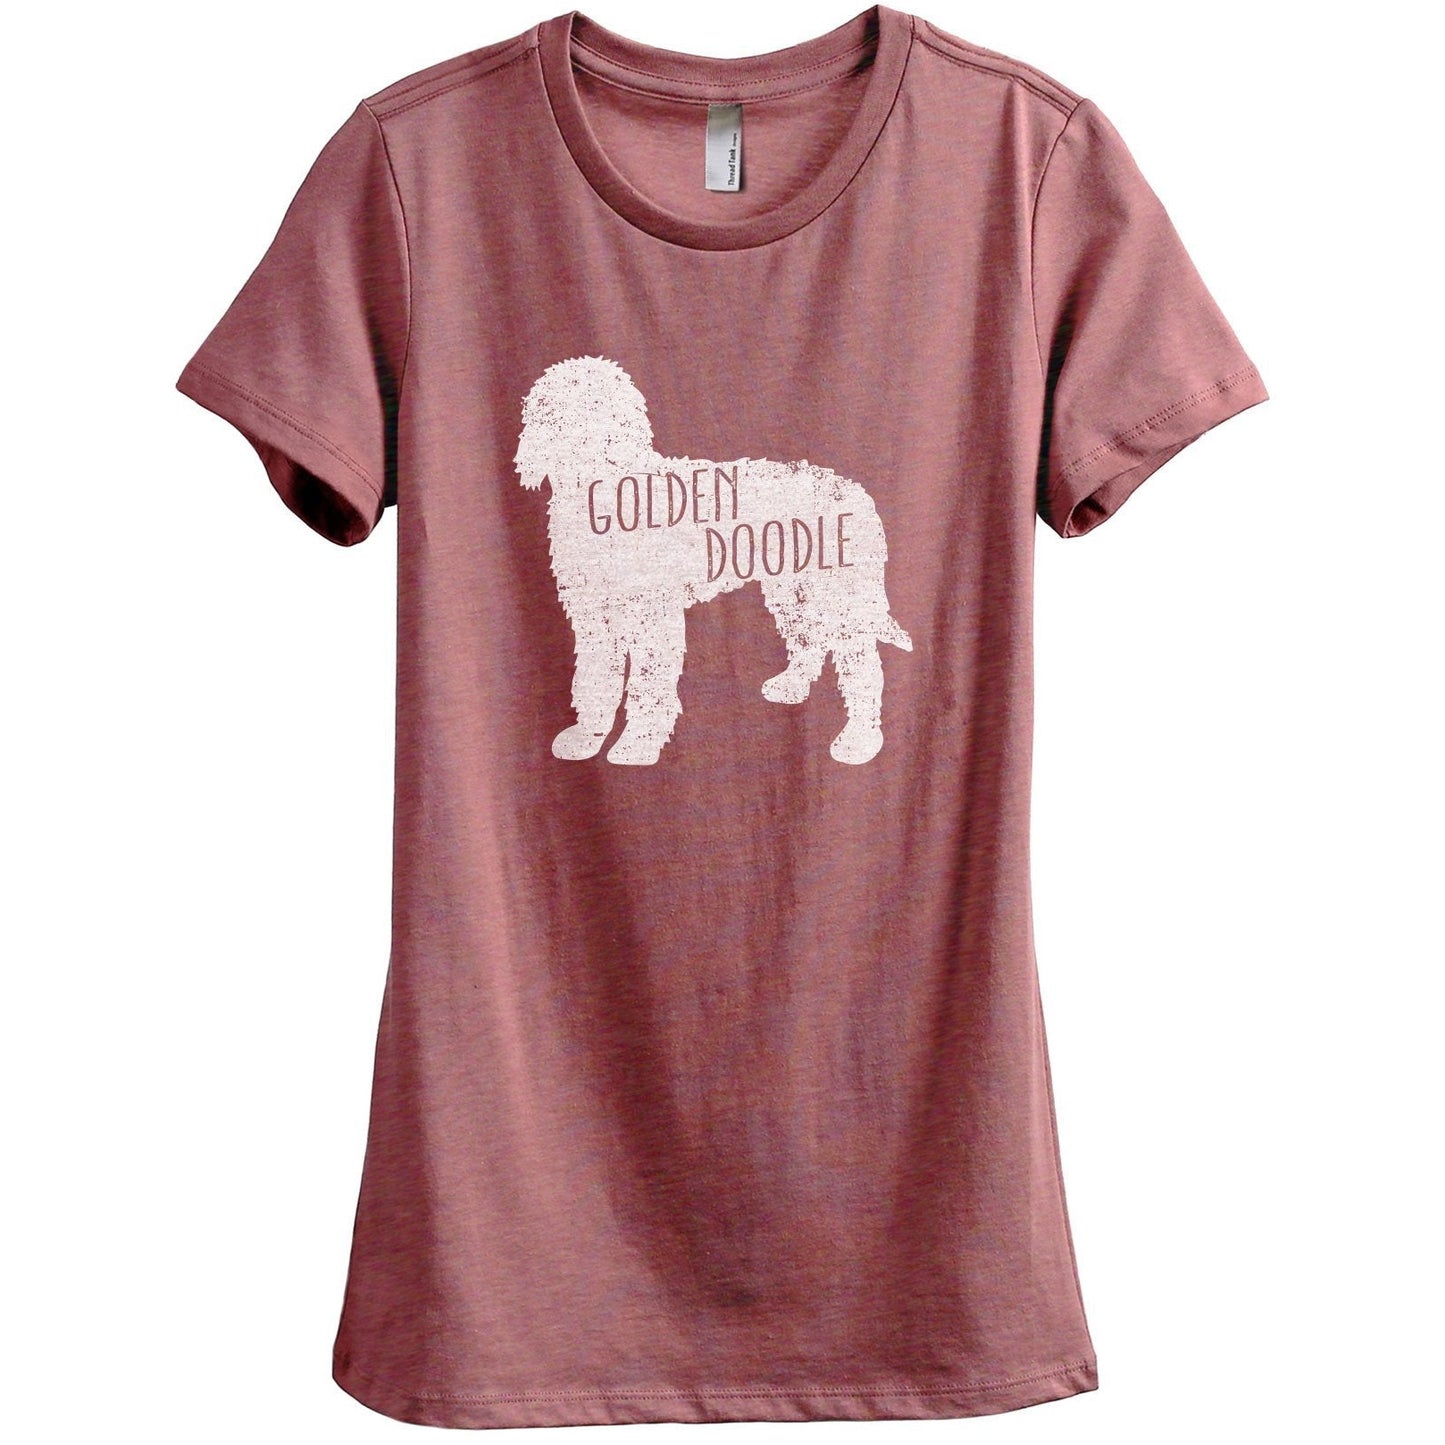 Golden Doodle Silhouette Women's Relaxed Crewneck T-Shirt Top Tee Heather Rouge